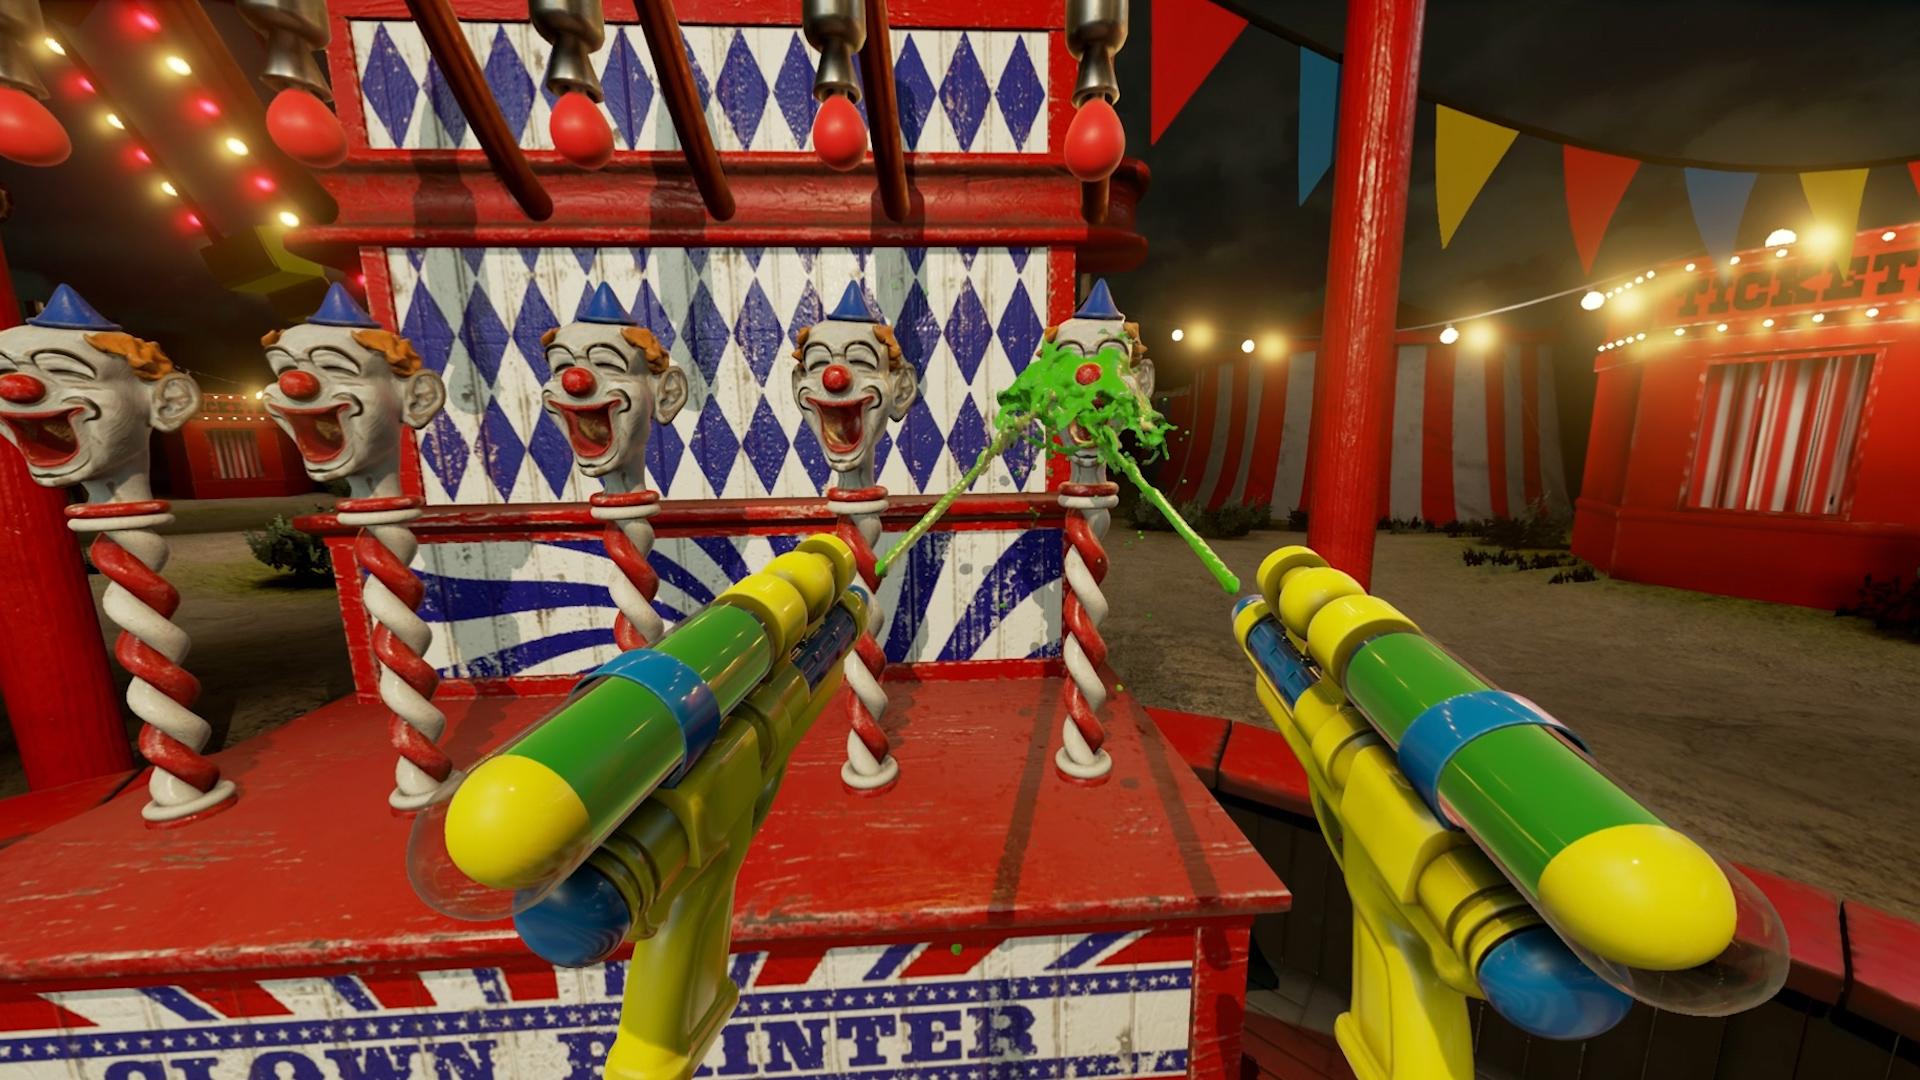 Vr Funhouse Shows Off Nvidia Gameworks With Virtual Carnival Mini